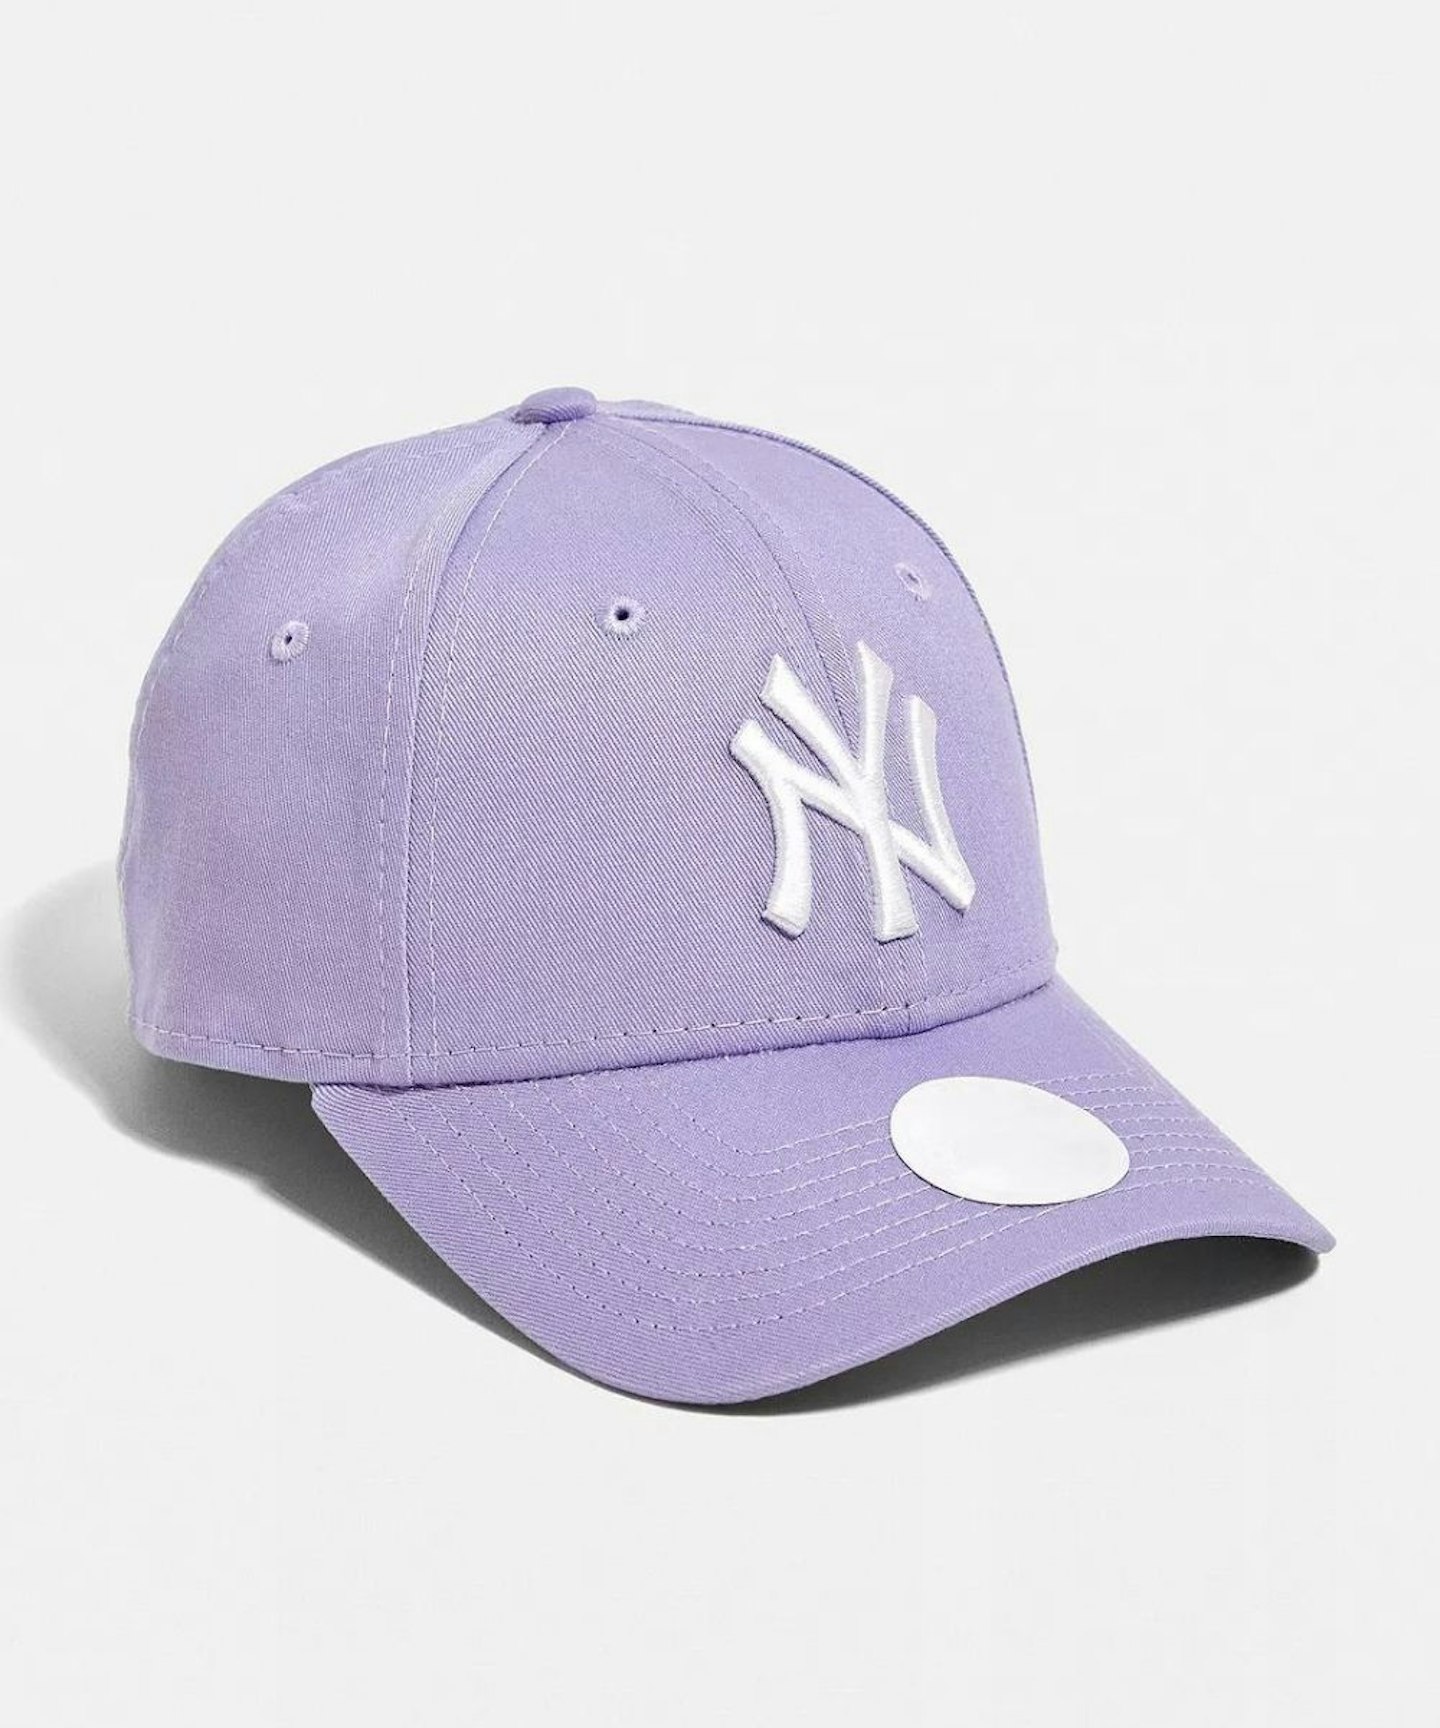 The best Baseball caps on the internet, as inspired by celebs